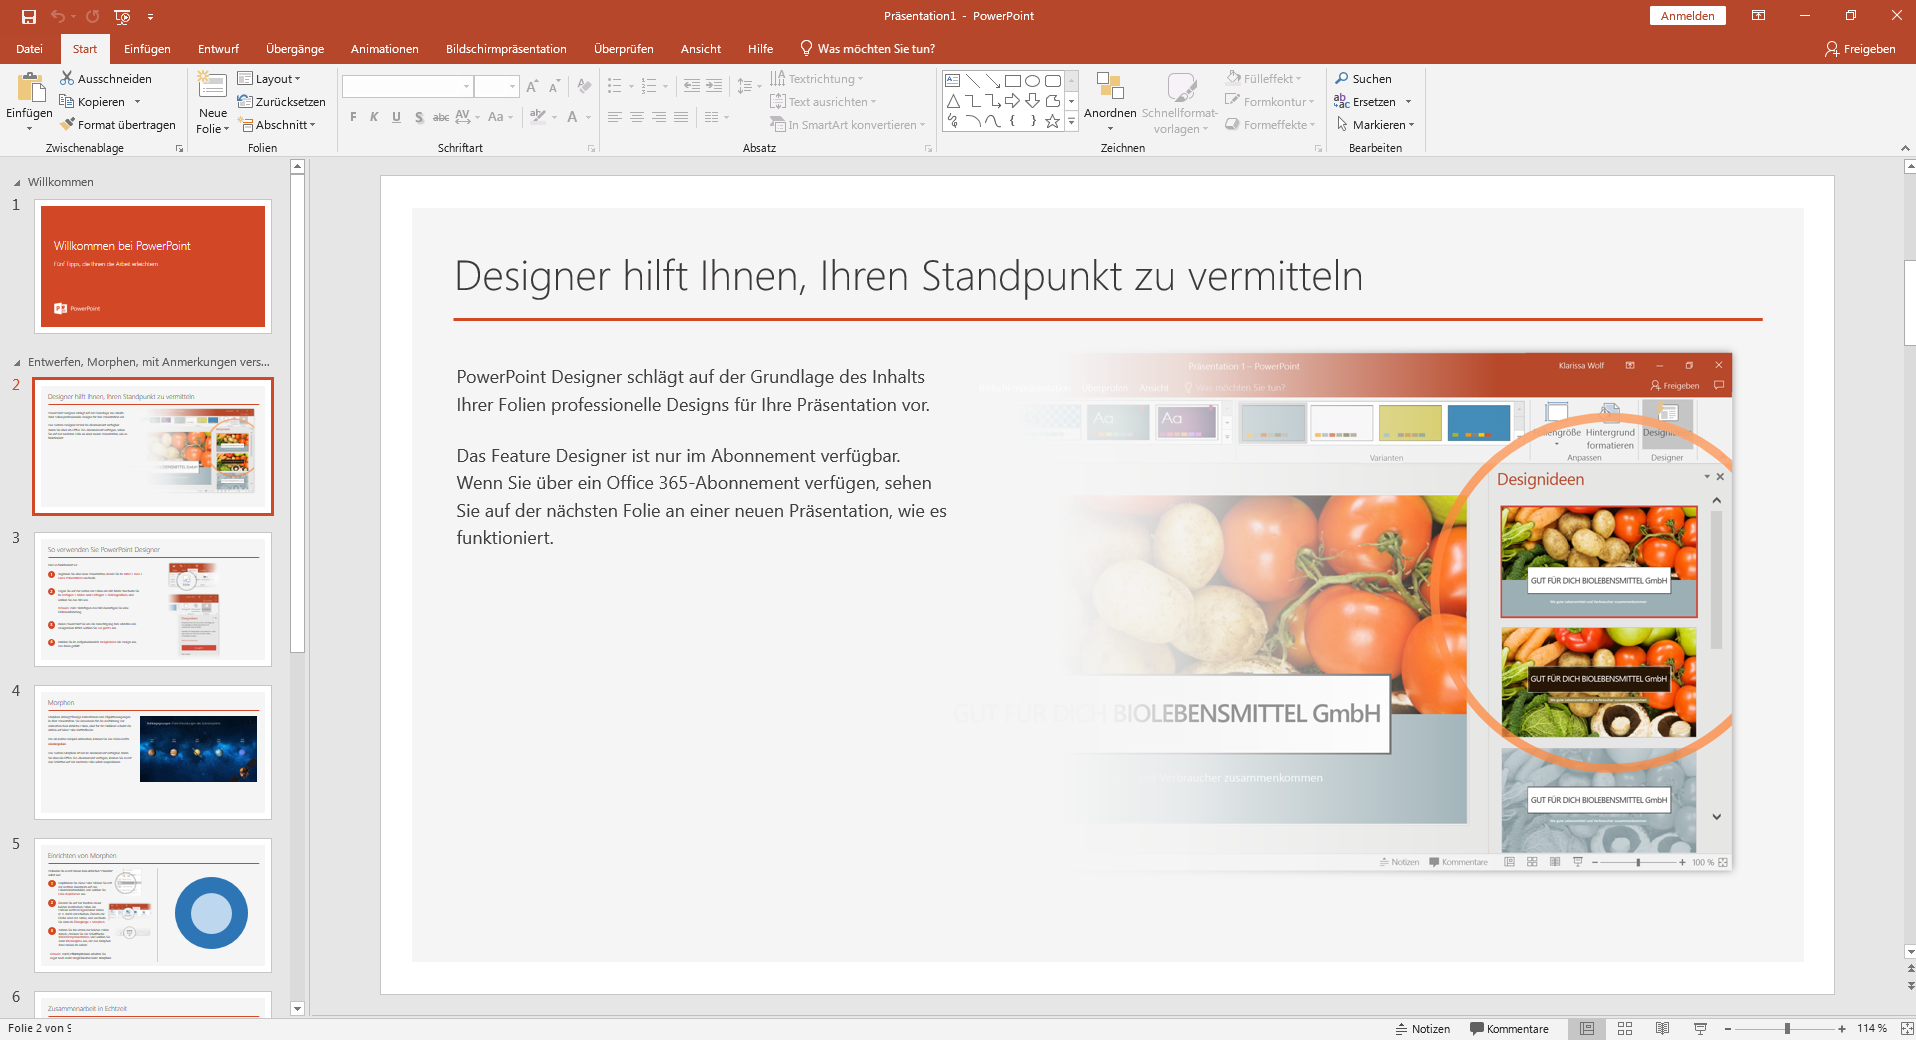 microsoft office home and student 2019 outlook download